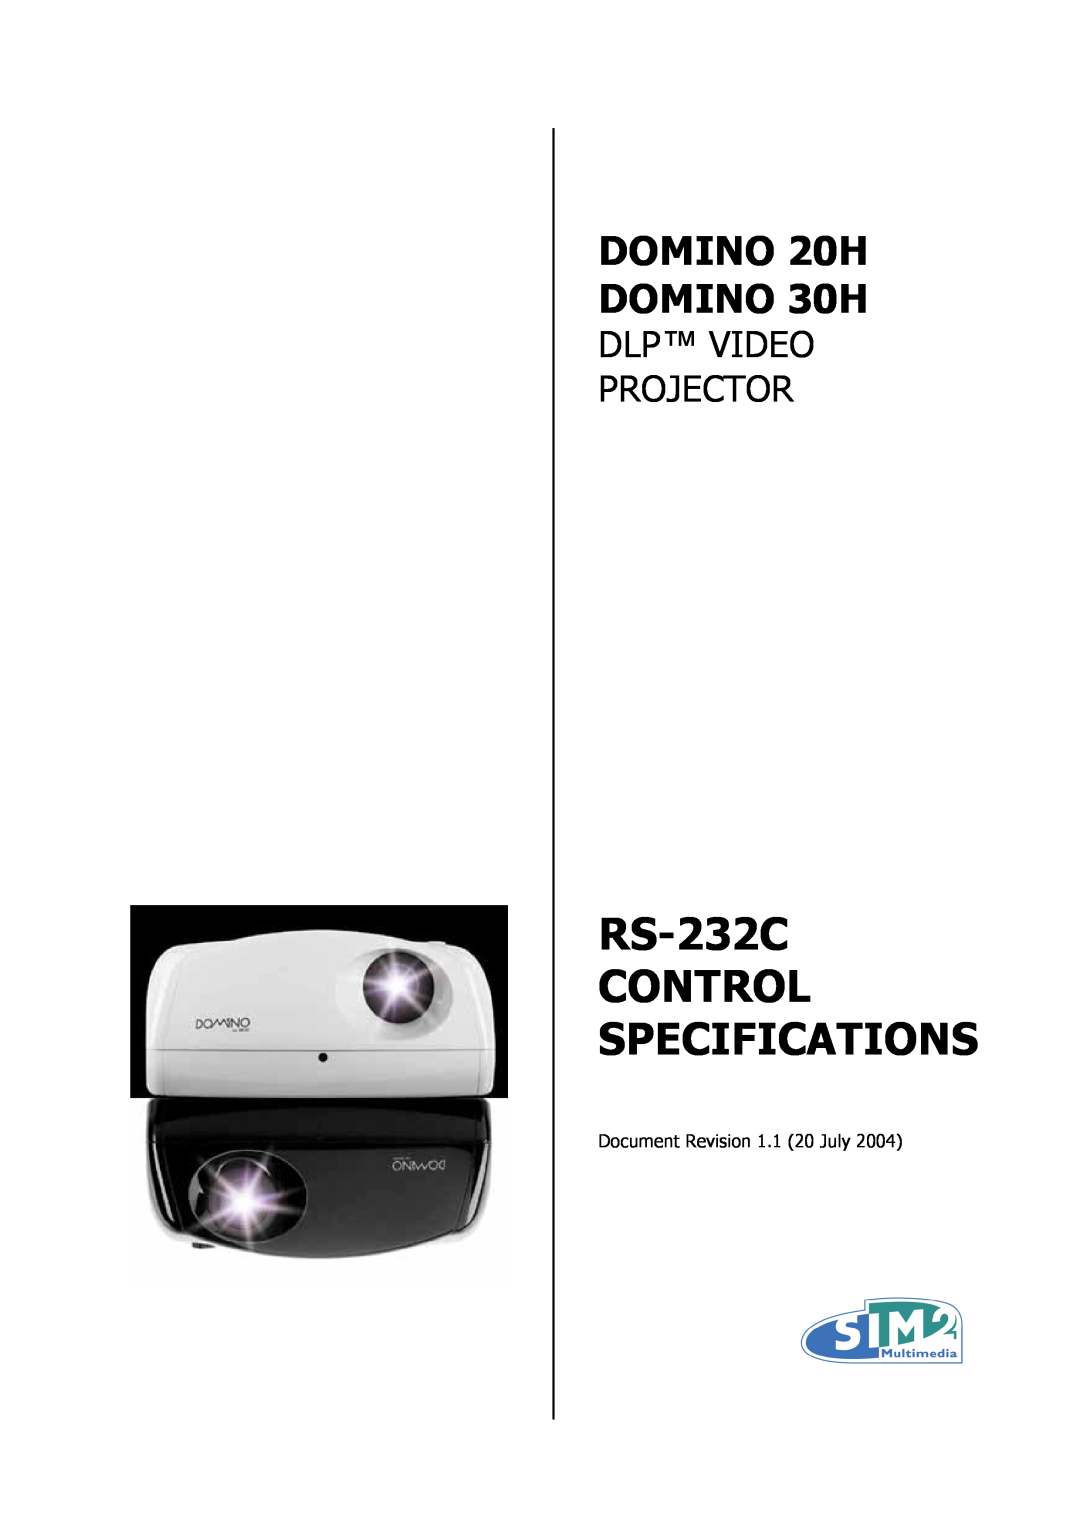 Sim2 Multimedia specifications RS-232C CONTROL SPECIFICATIONS, DOMINO 20H DOMINO 30H, Dlp Video Projector 